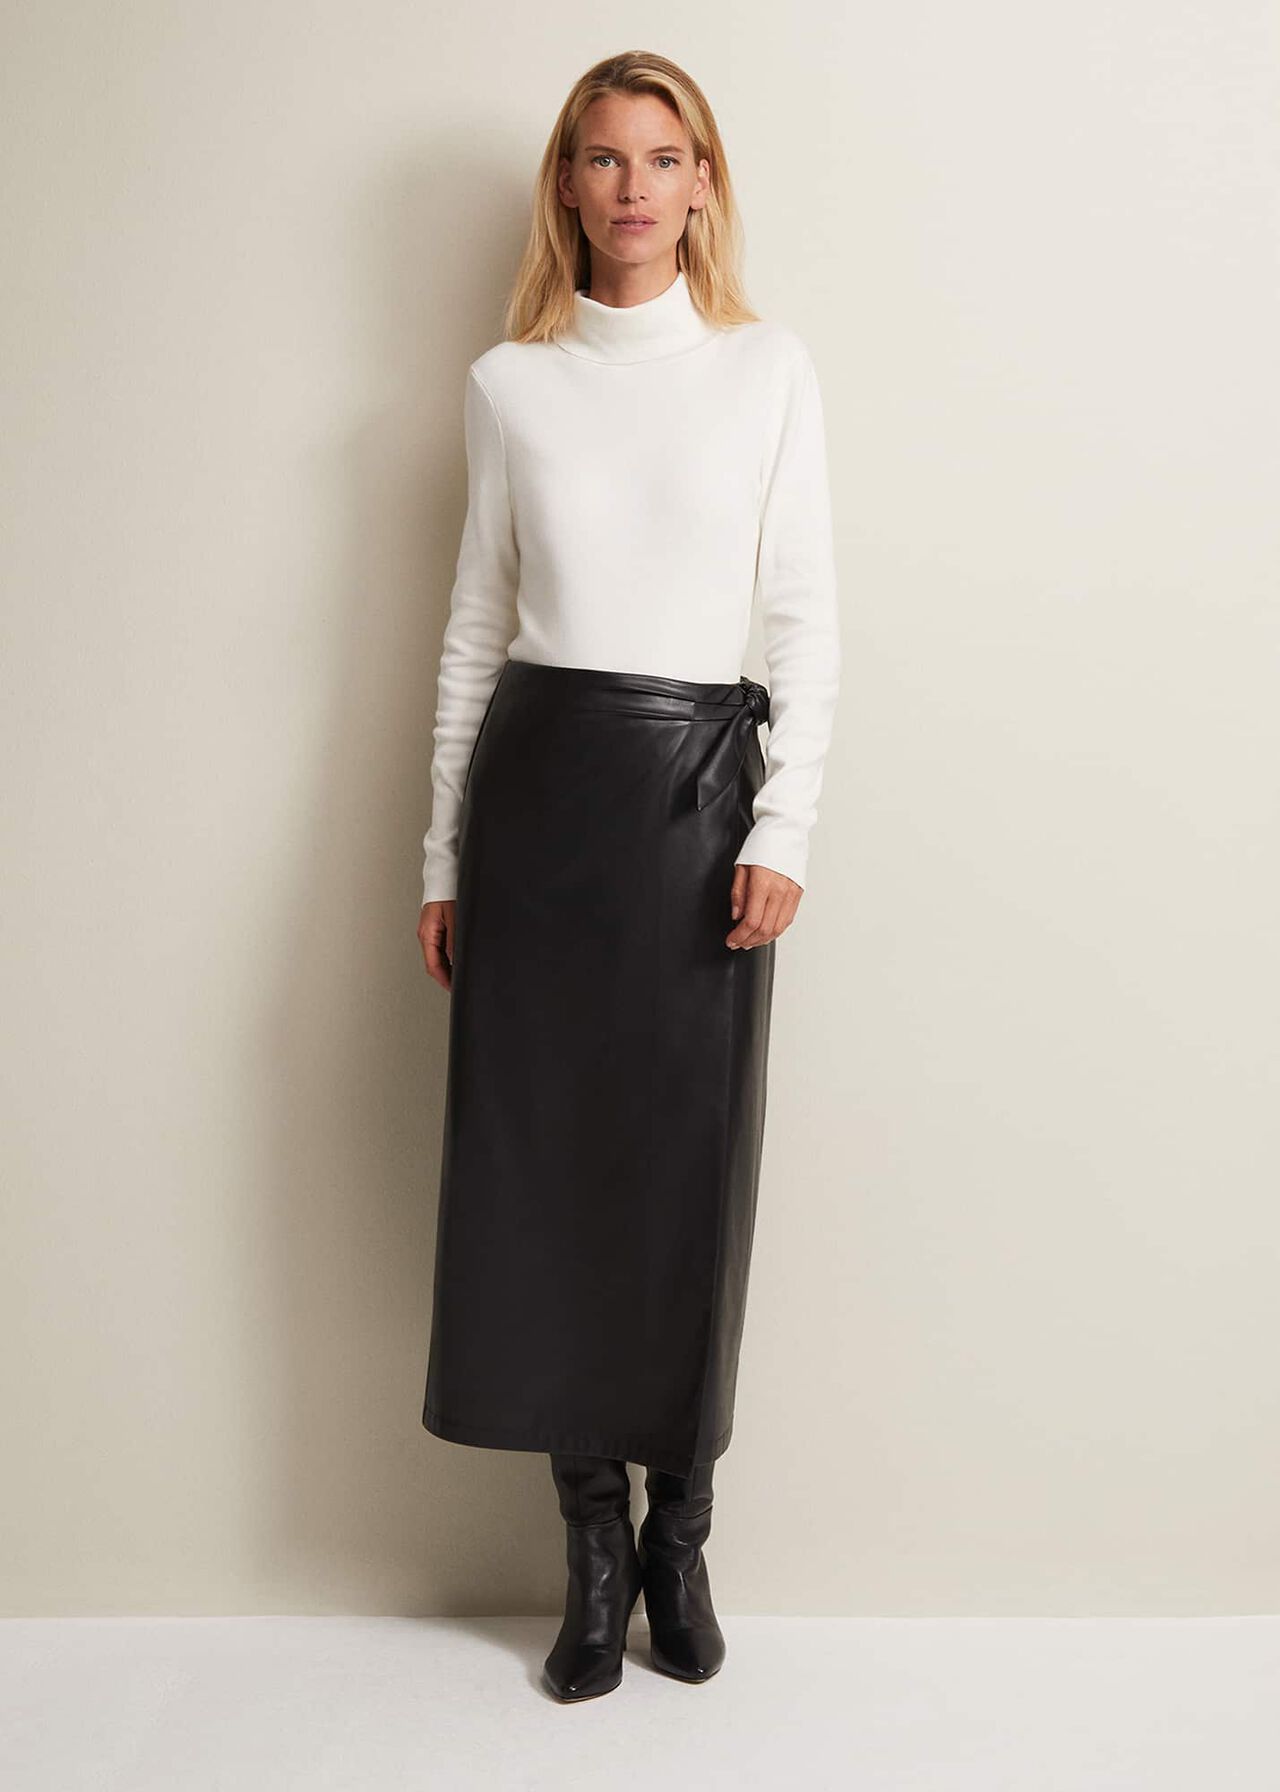 Black Faux Leather Wrap Maxi Skirt with Tie Waist | Phase Eight | Phase ...